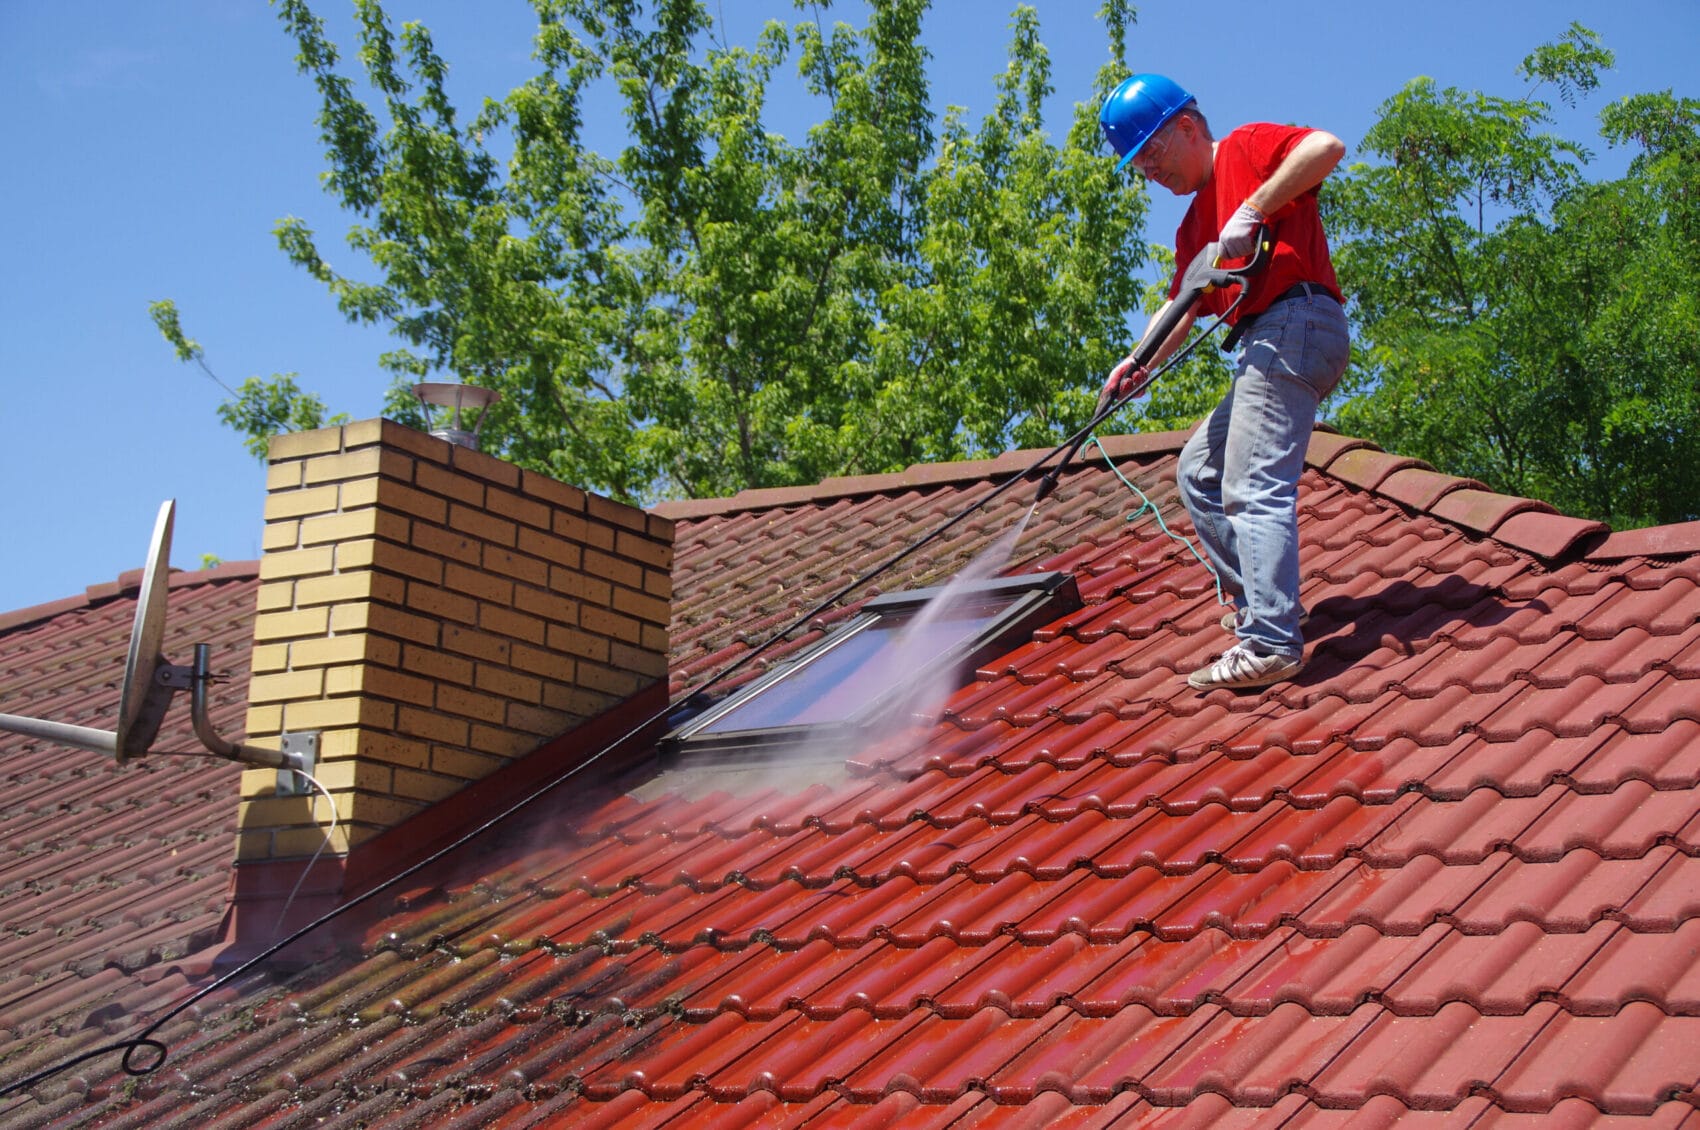 Man on cleaning roof with a pressure washer